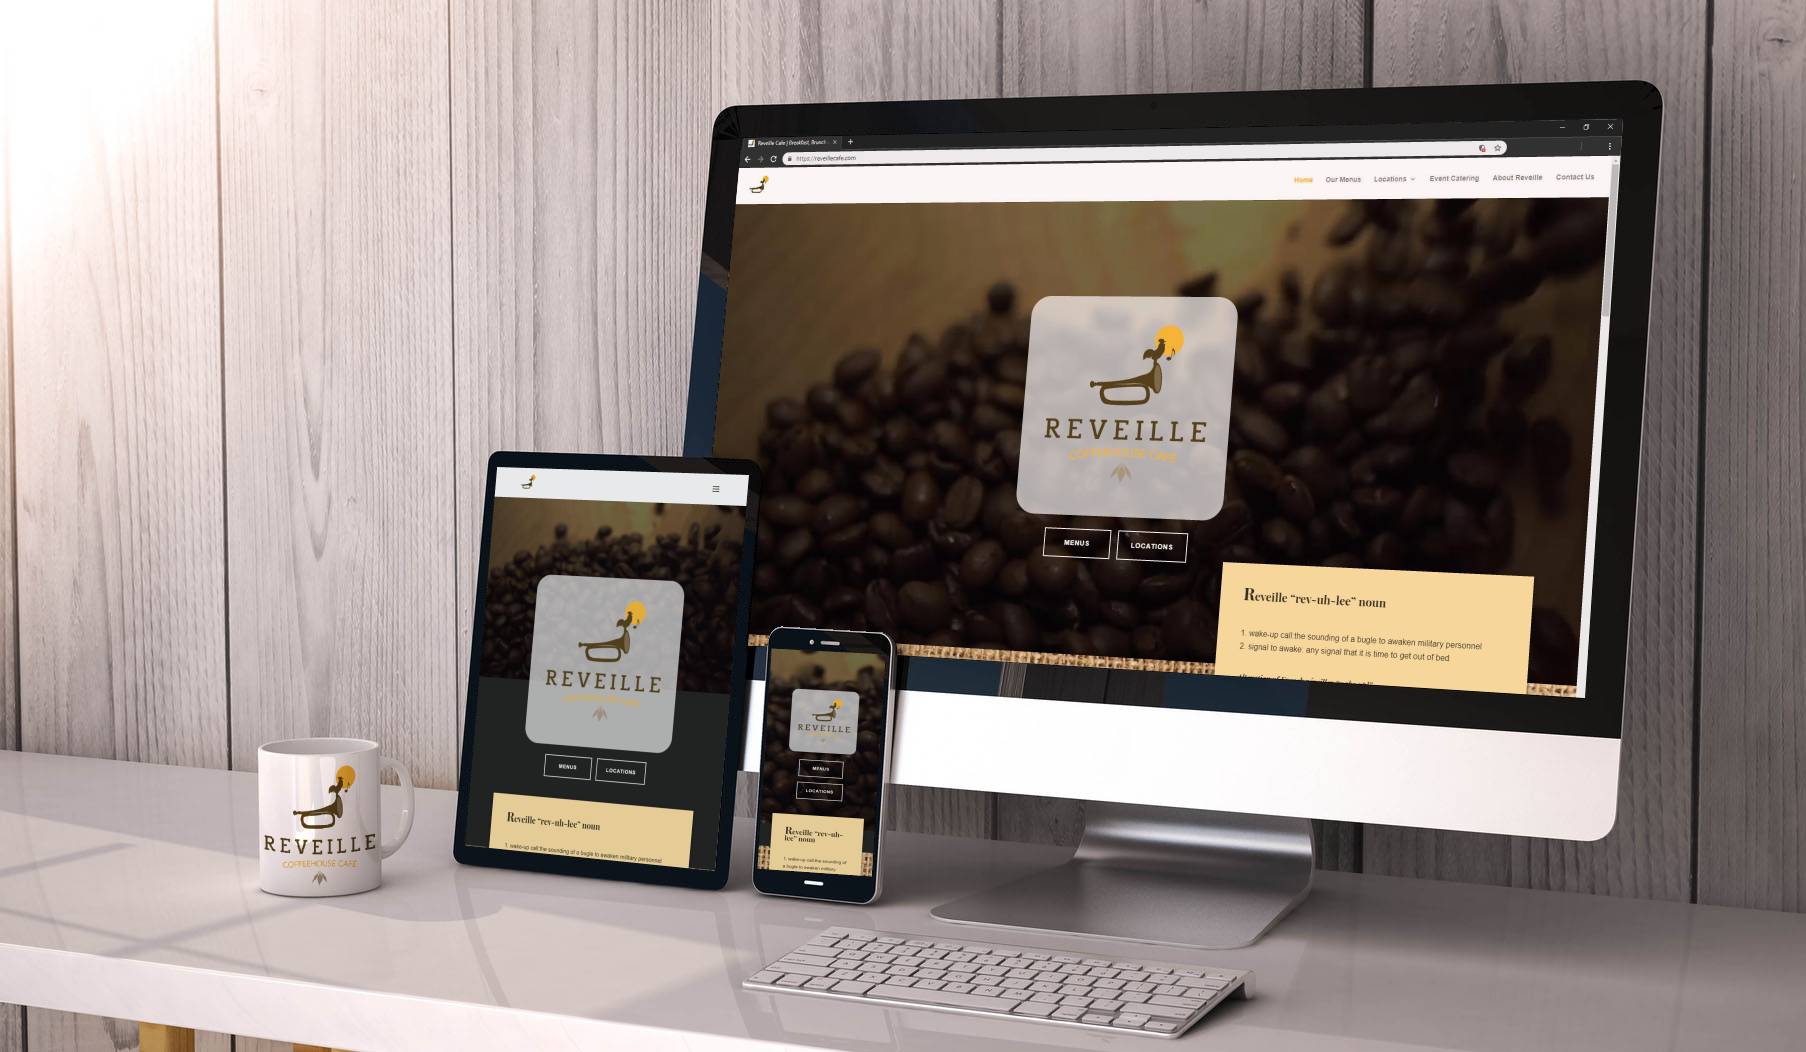 Reveille Cafe - New Website Design and Layout